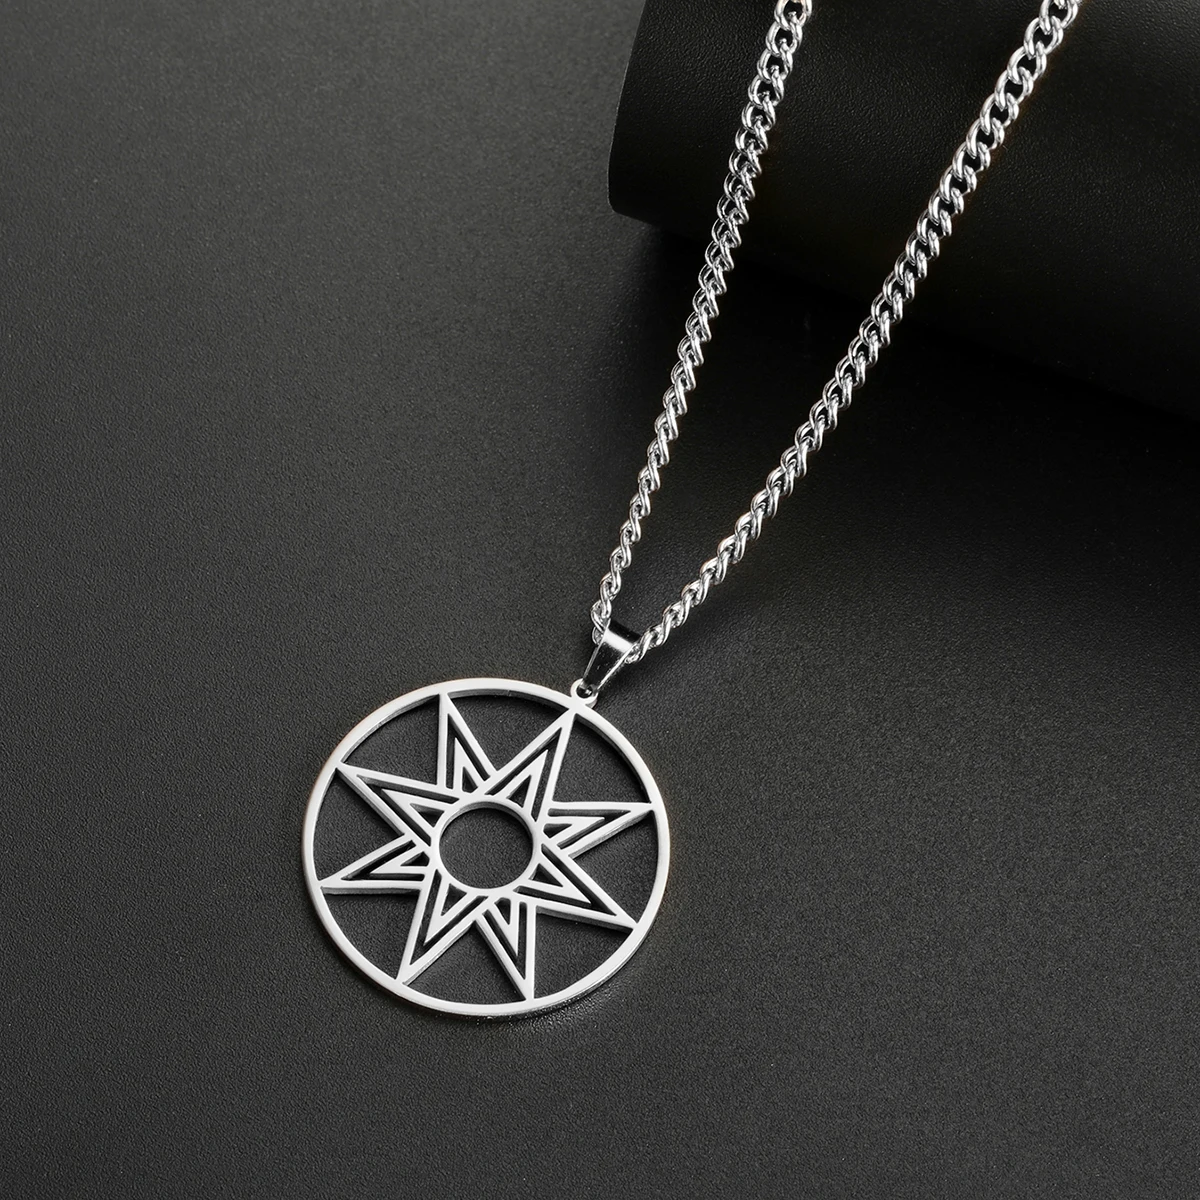 LIKGREAT Large Octagram Necklace Stainless Steel 8 Point Star of Ishtar Innana Star of Venus Charm Pendant Hellenic Necklace